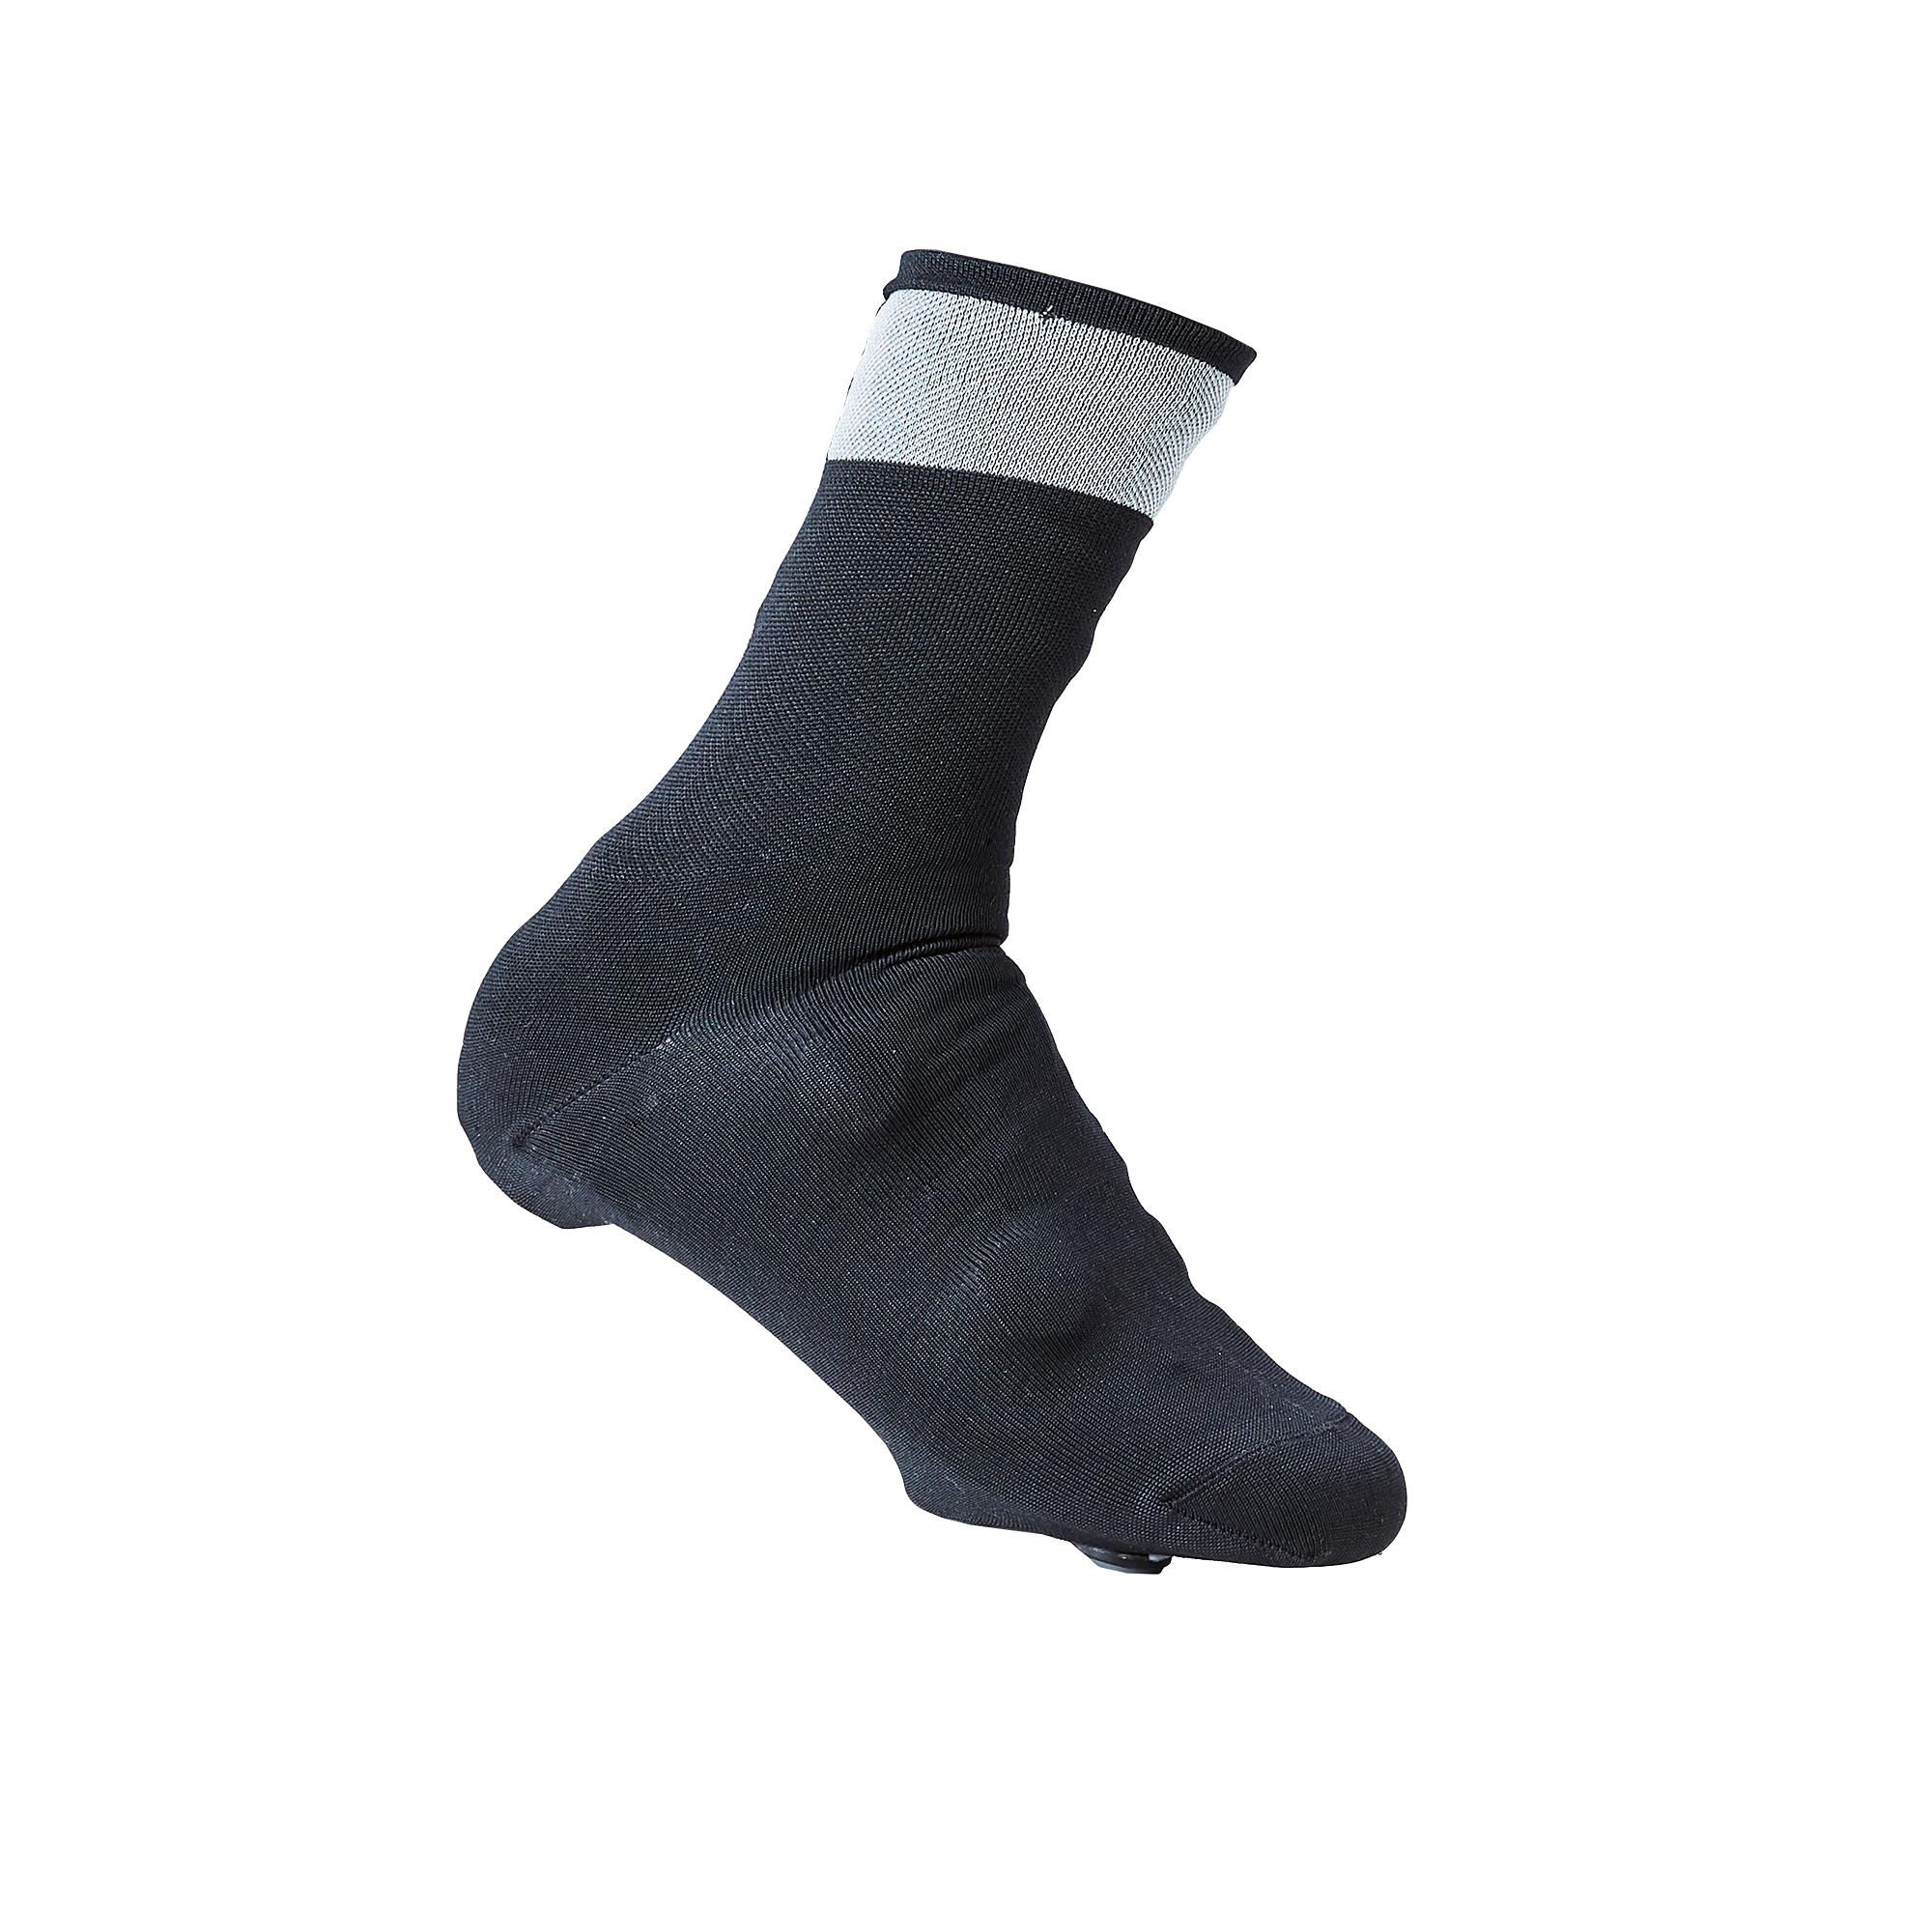 Knitted Cycling Overshoes - Black 5/8